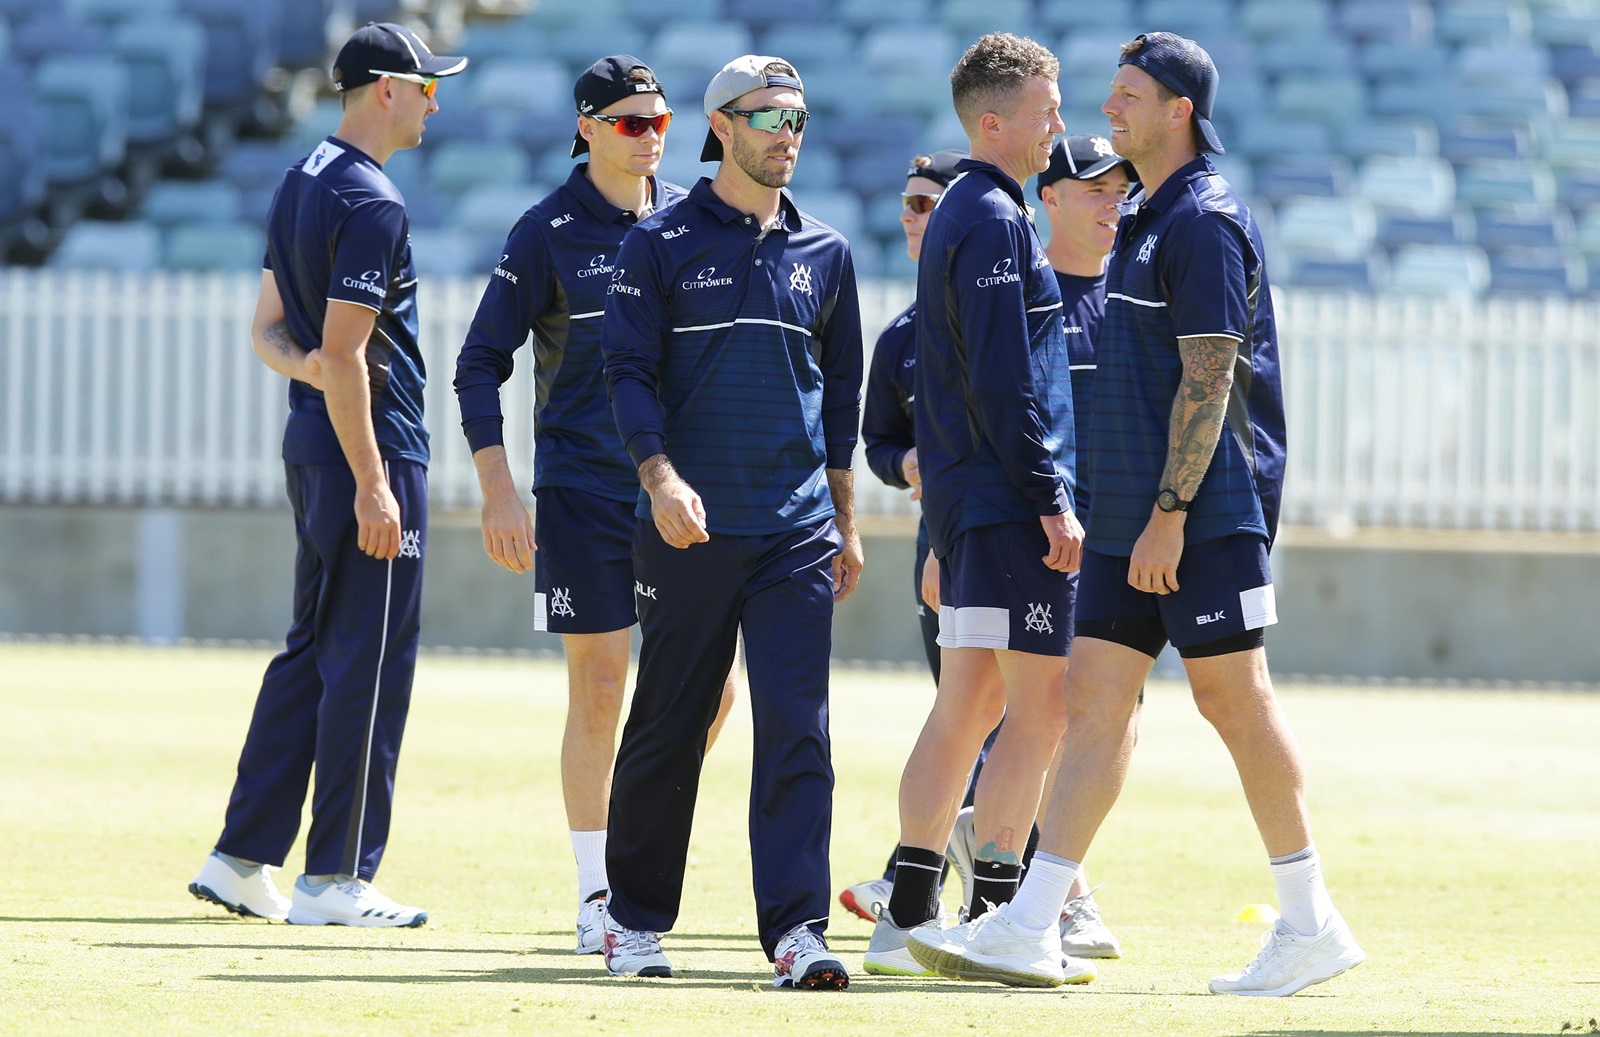 Maxwell trained with Victoria teammates at MCG | Getty Images